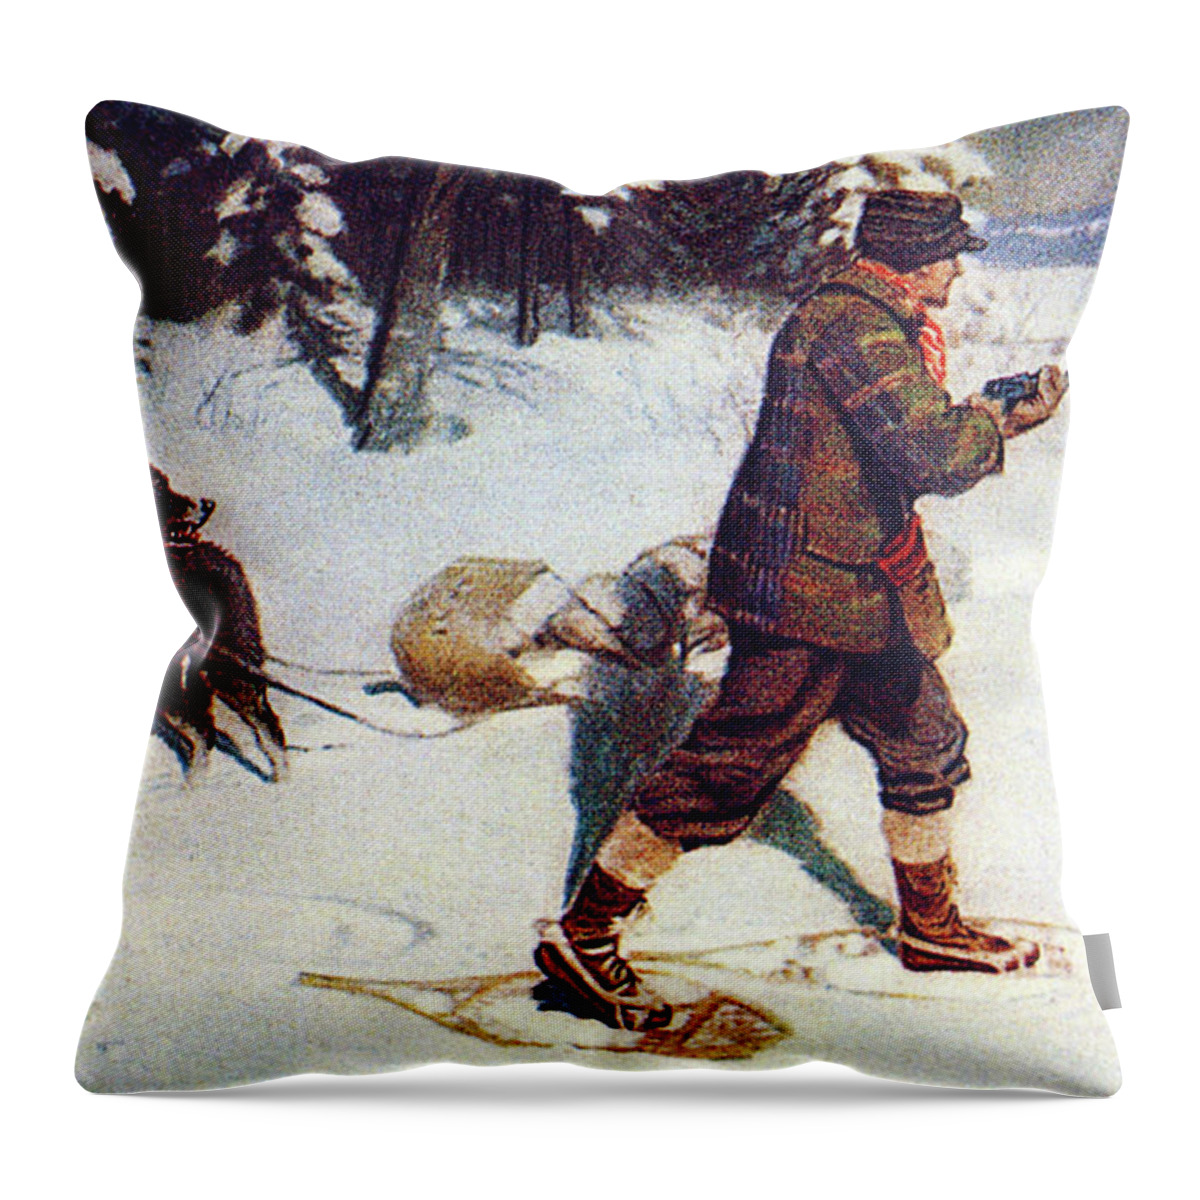 Outdoor Throw Pillow featuring the painting Backtracking by Philip R Goodwin